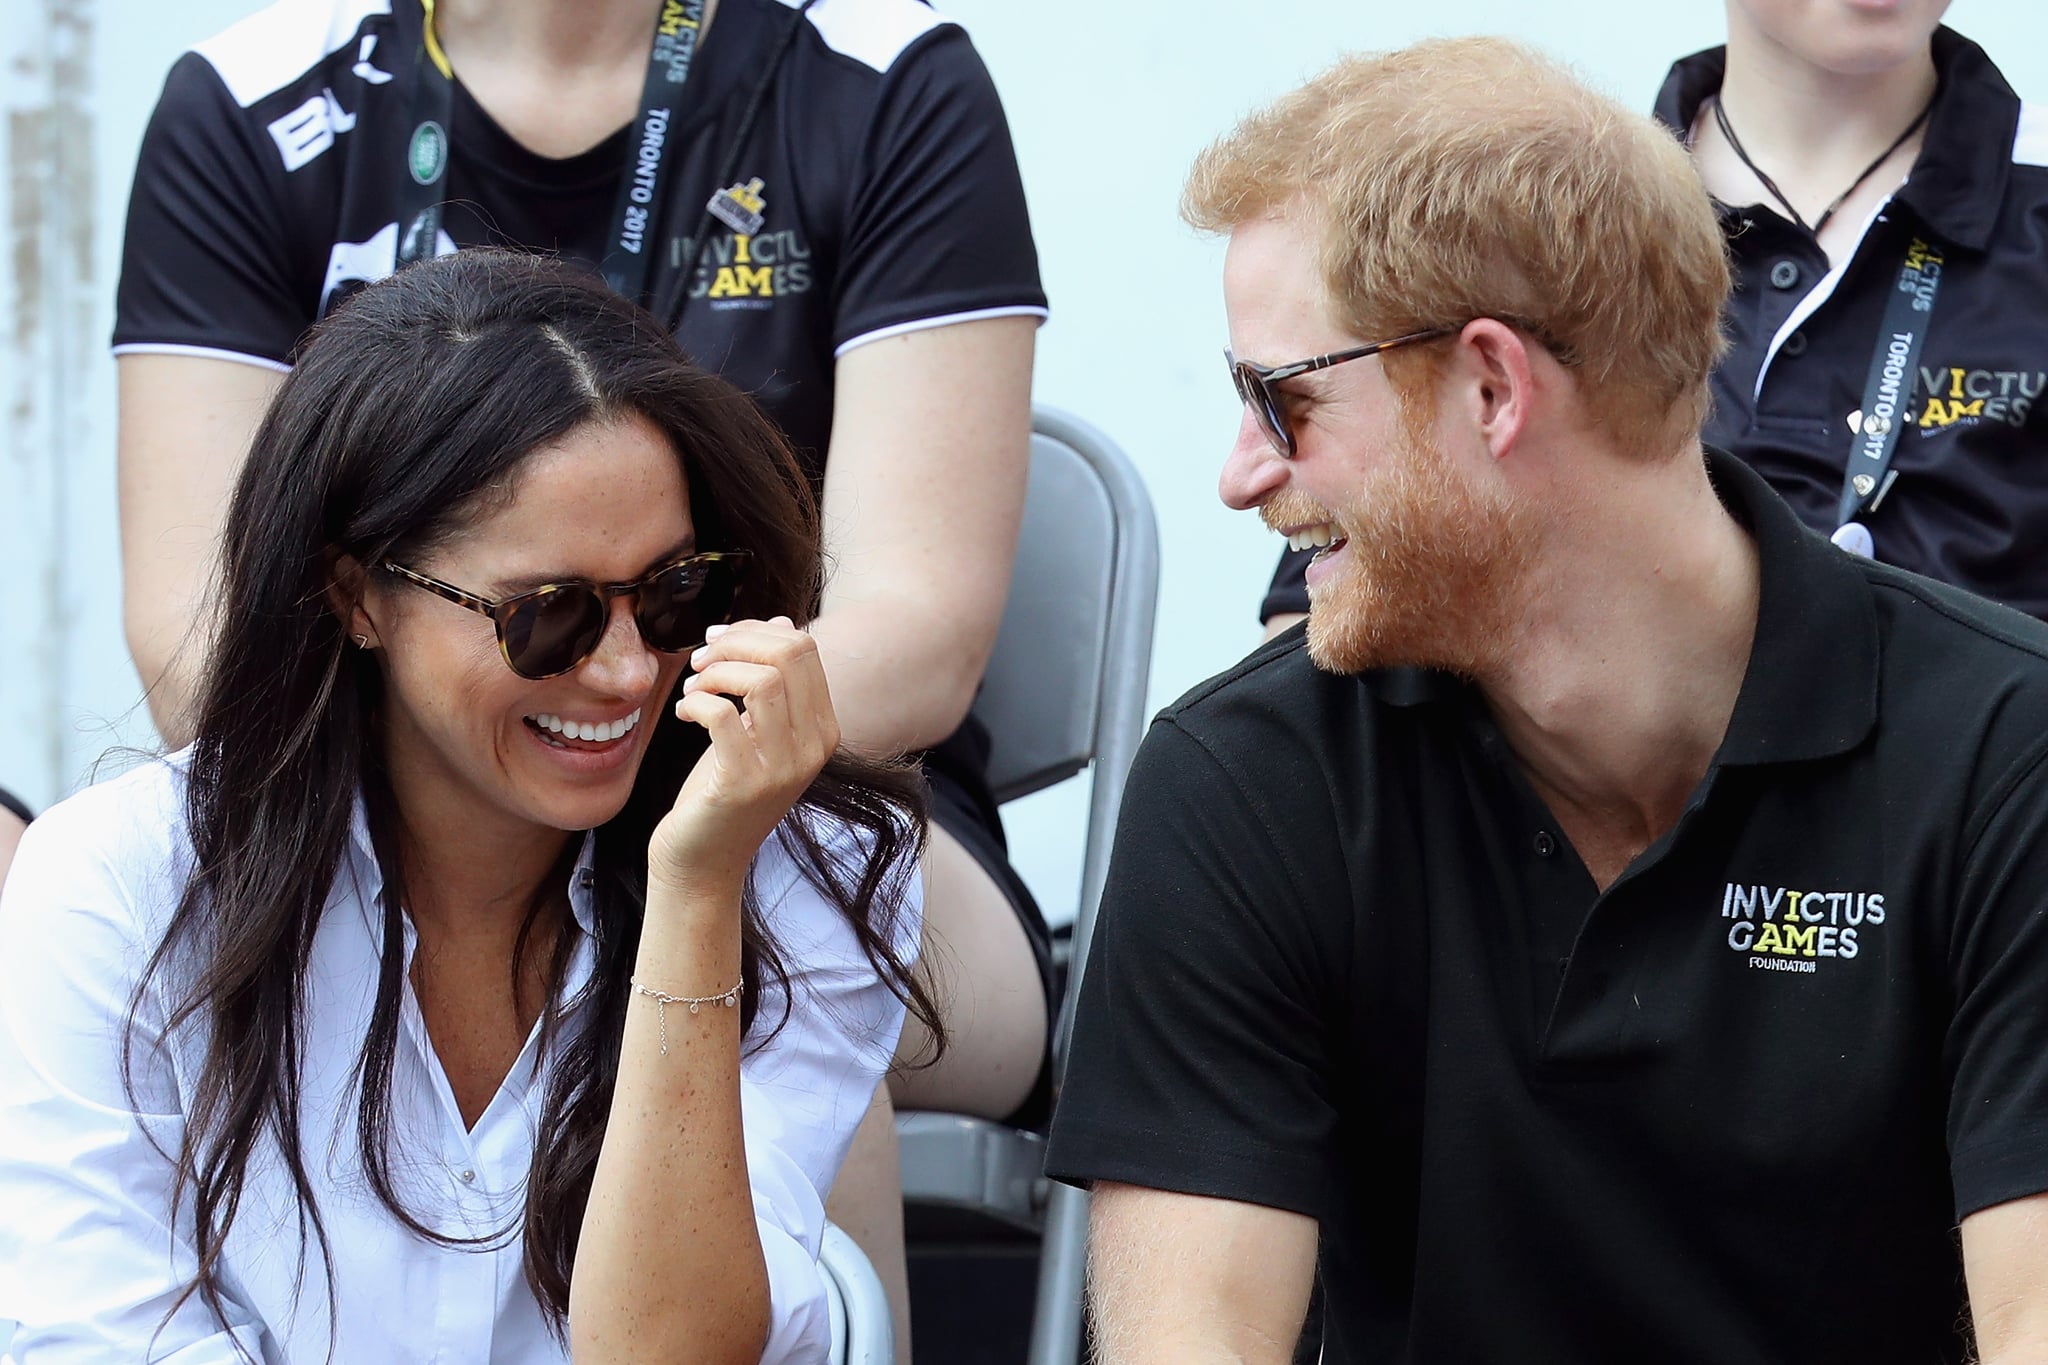 TORONTO, ON - SEPTEMBER 25:  Prince Harry (R) and Meghan Markle (L) attend a Wheelchair Tennis match during the Invictus Games 2017 at Nathan Philips Square on September 25, 2017 in Toronto, Canada  (Photo by Chris Jackson/Getty Images for the Invictus Games Foundation )